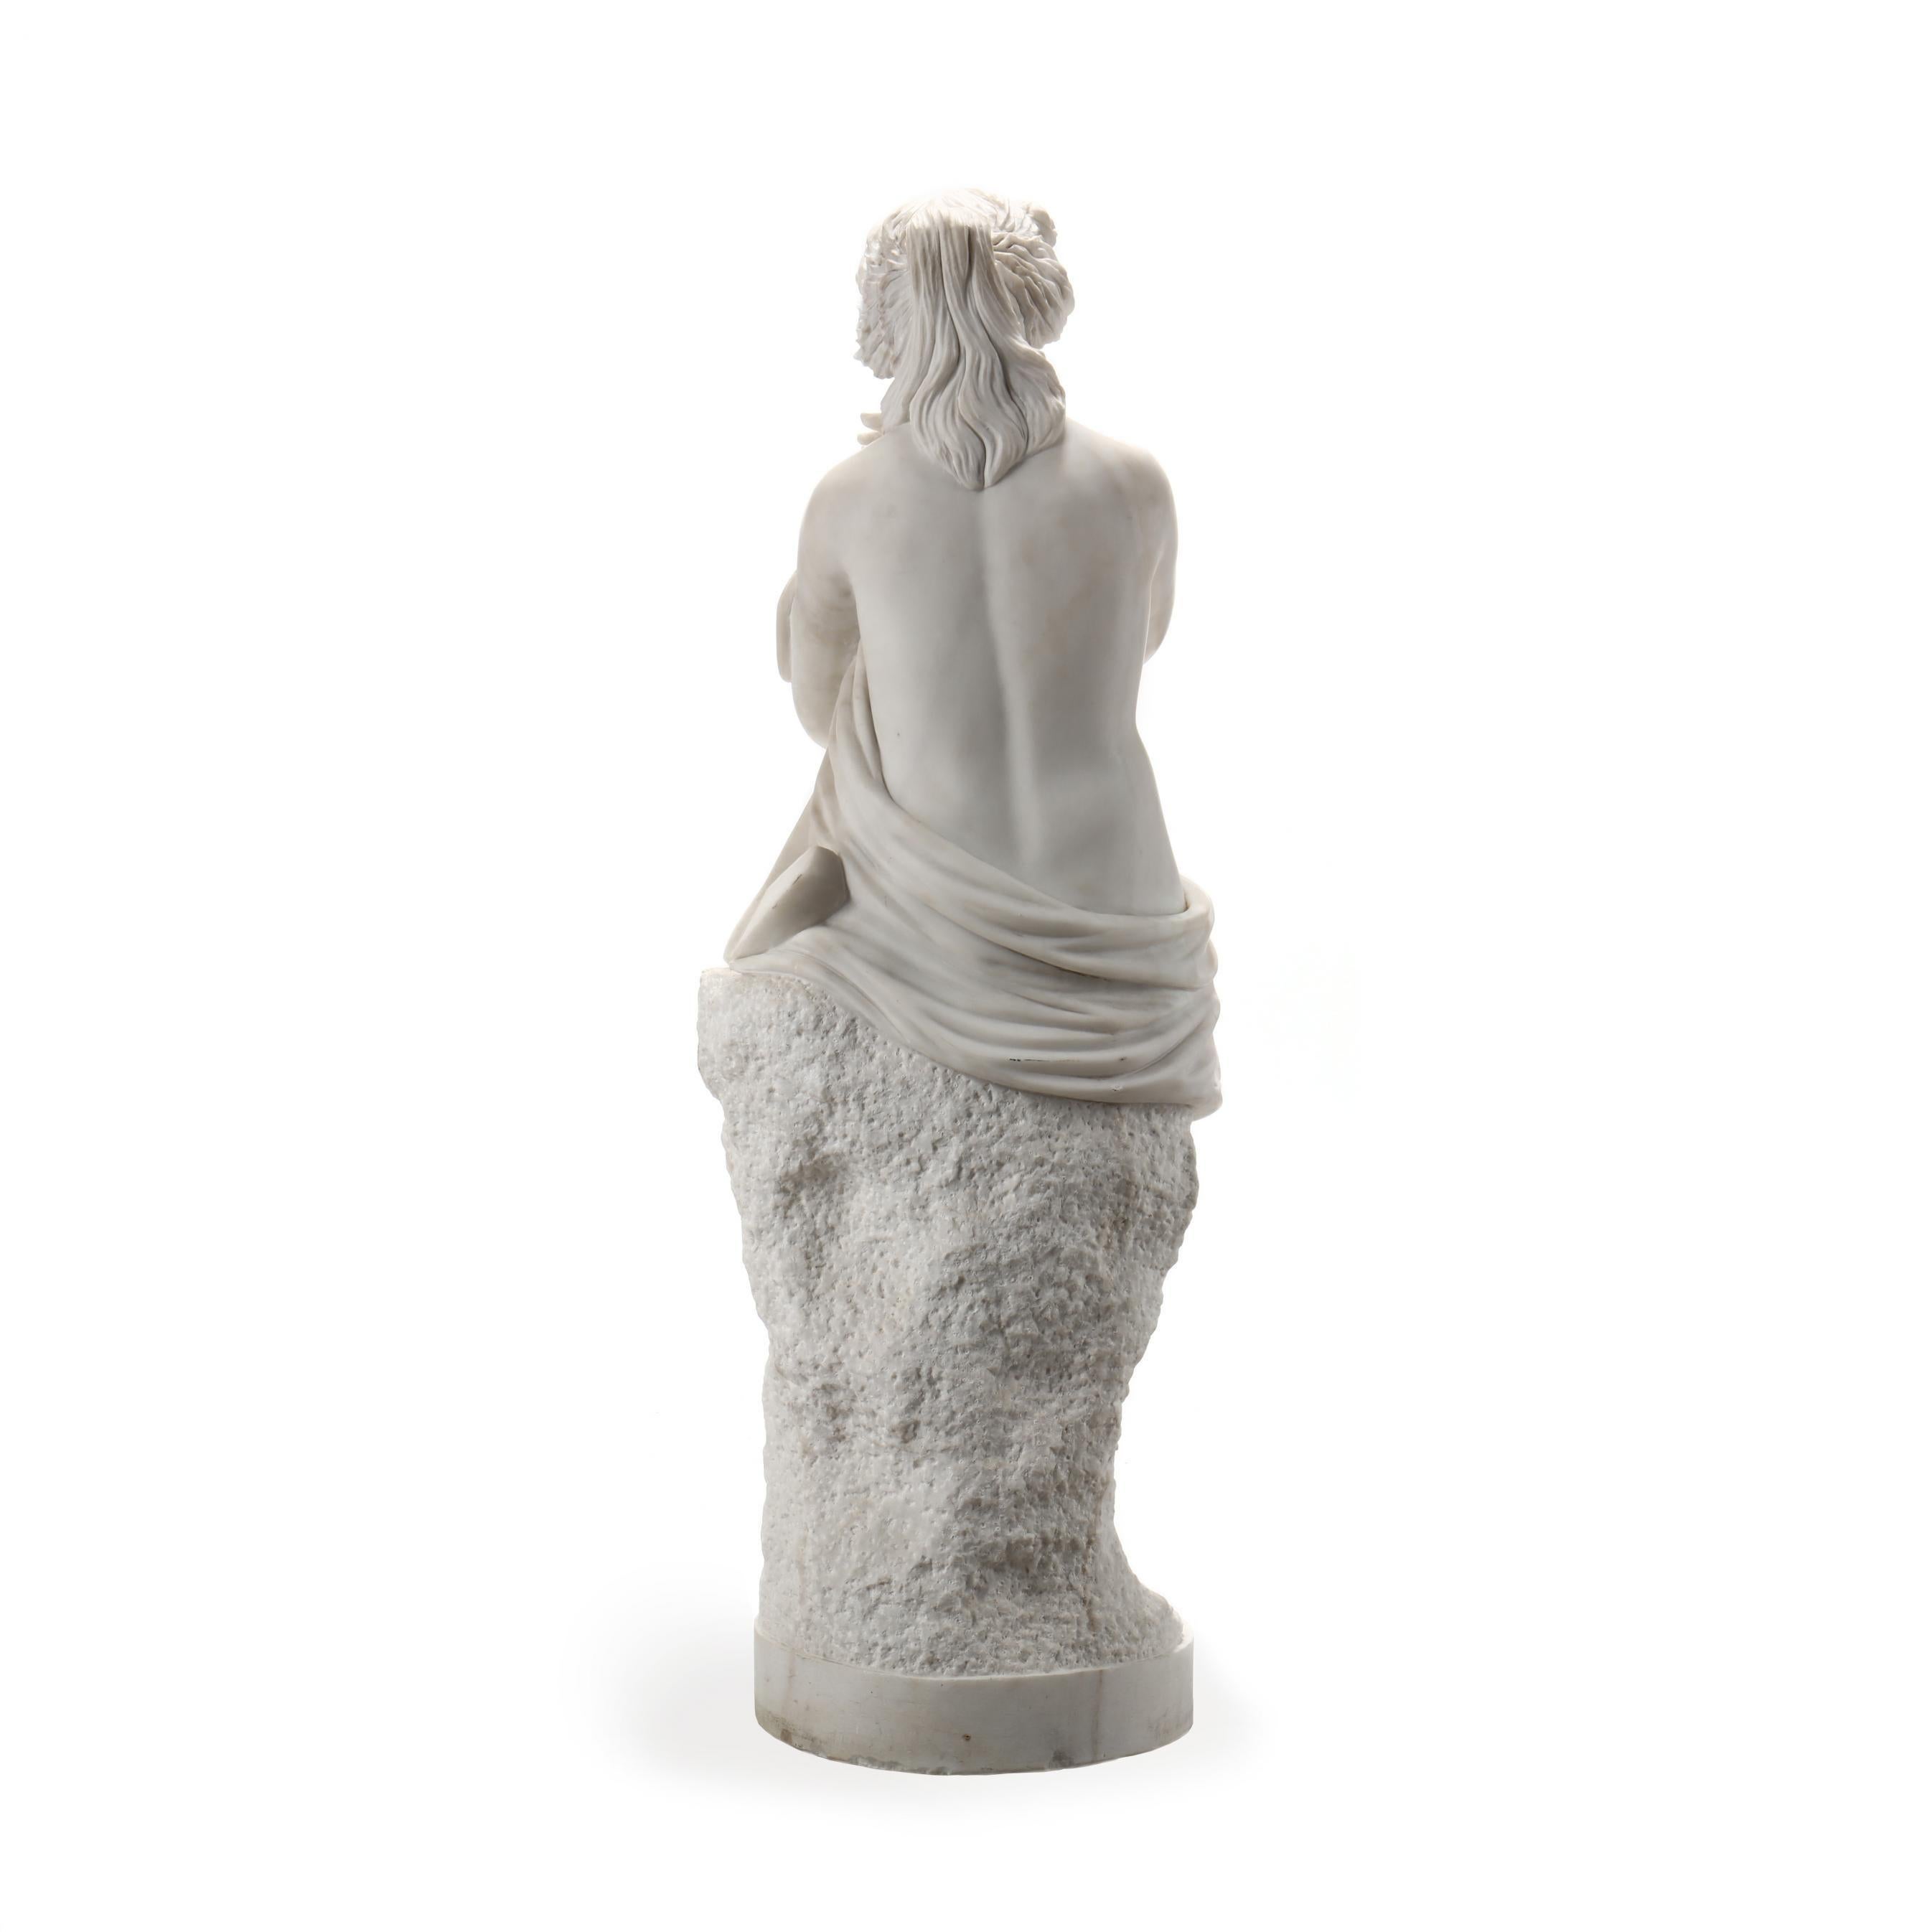 Life-size carved marble allegorical sculpture of hope

circa 1900, unsigned, the woman wearing a Roman style gown and depicted perched on a craggy outcropping with an anchor by her side, roses dress her hair. 
60 in.